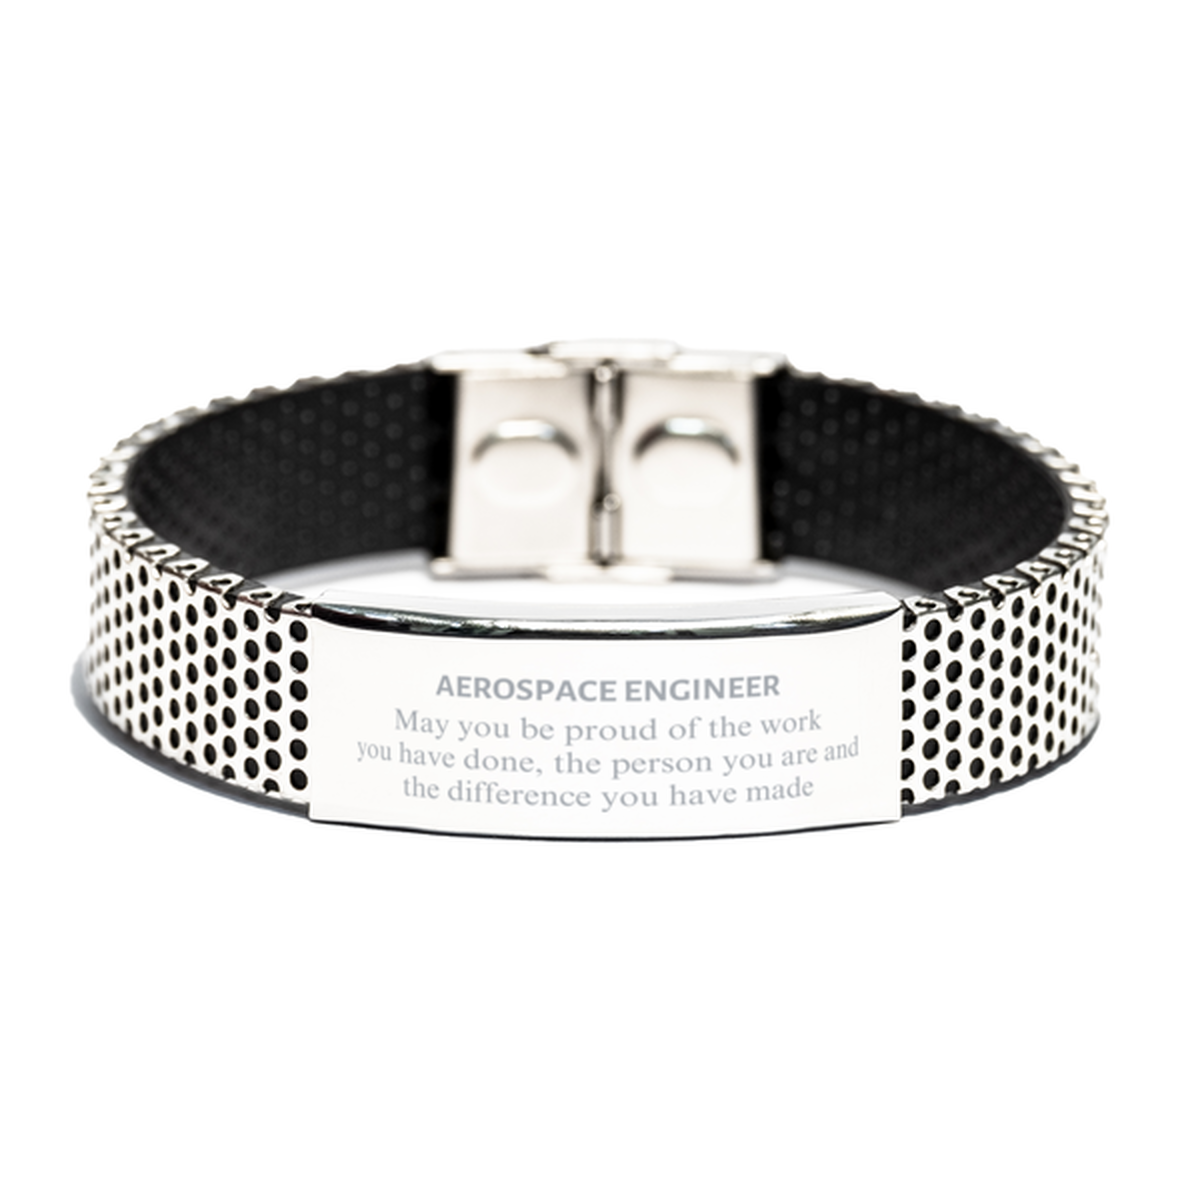 Aerospace Engineer May you be proud of the work you have done, Retirement Aerospace Engineer Stainless Steel Bracelet for Colleague Appreciation Gifts Amazing for Aerospace Engineer